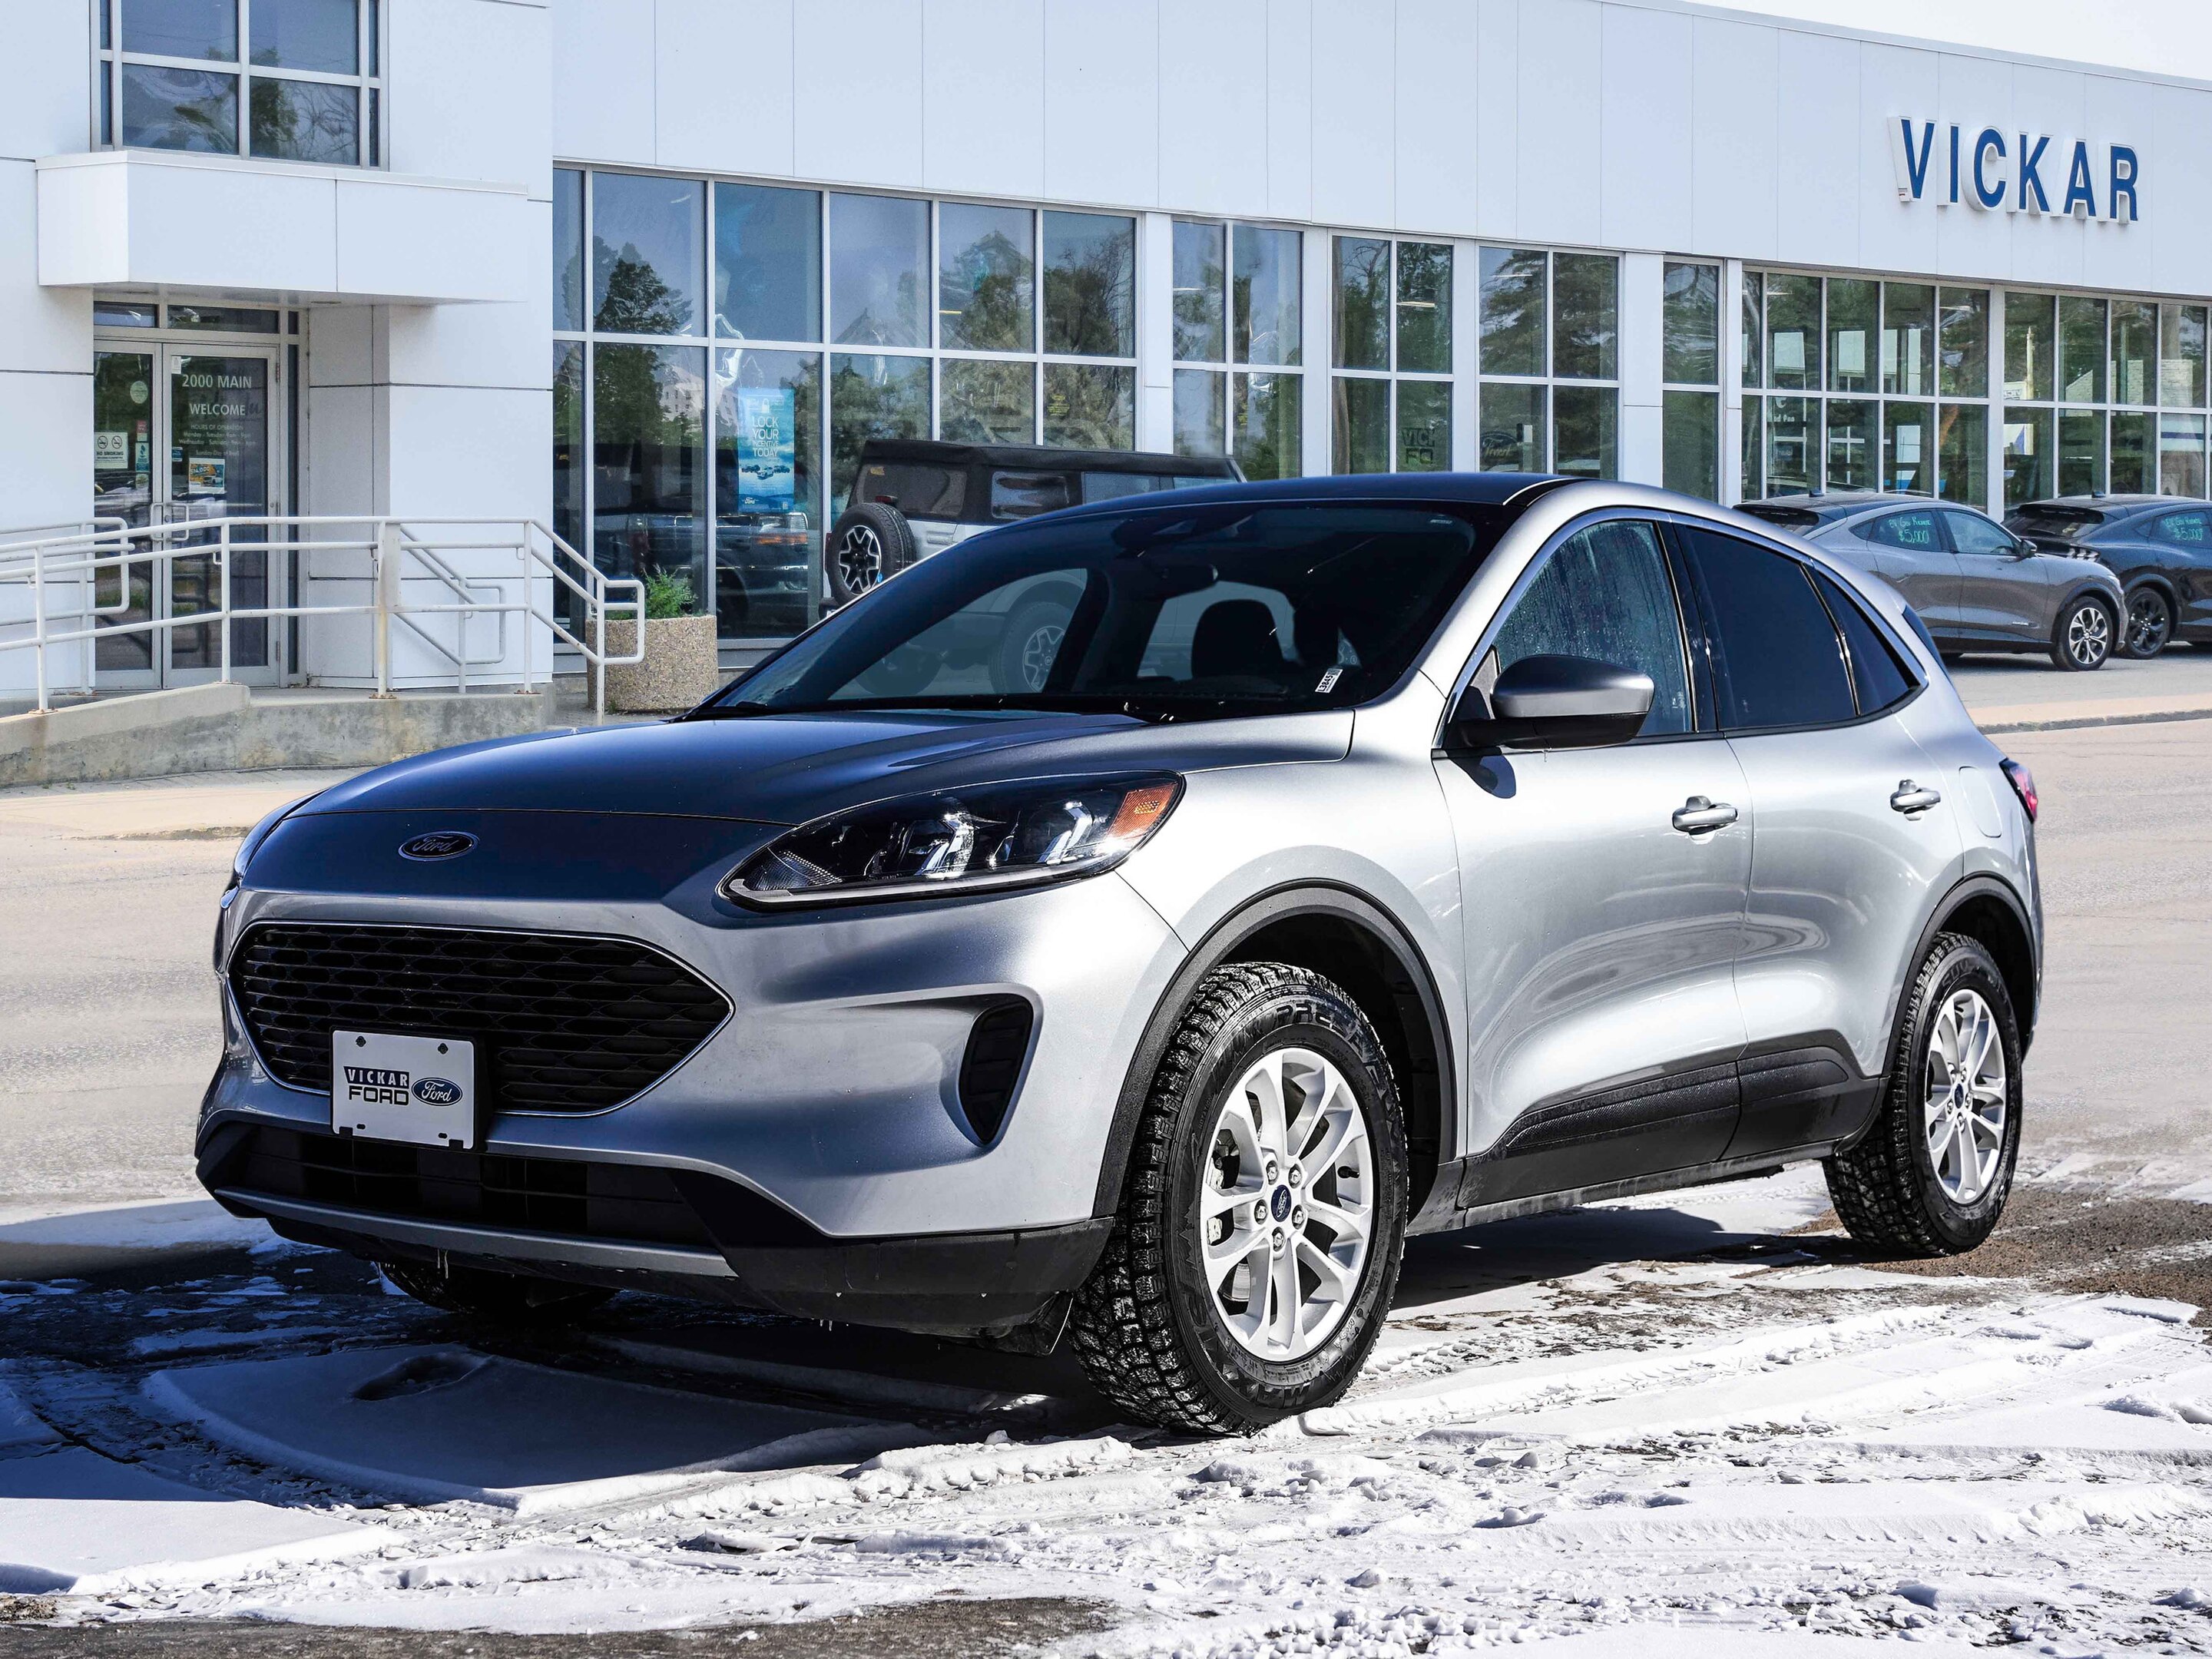 2021 Ford Escape SE AWD Local One Owner Lease Return